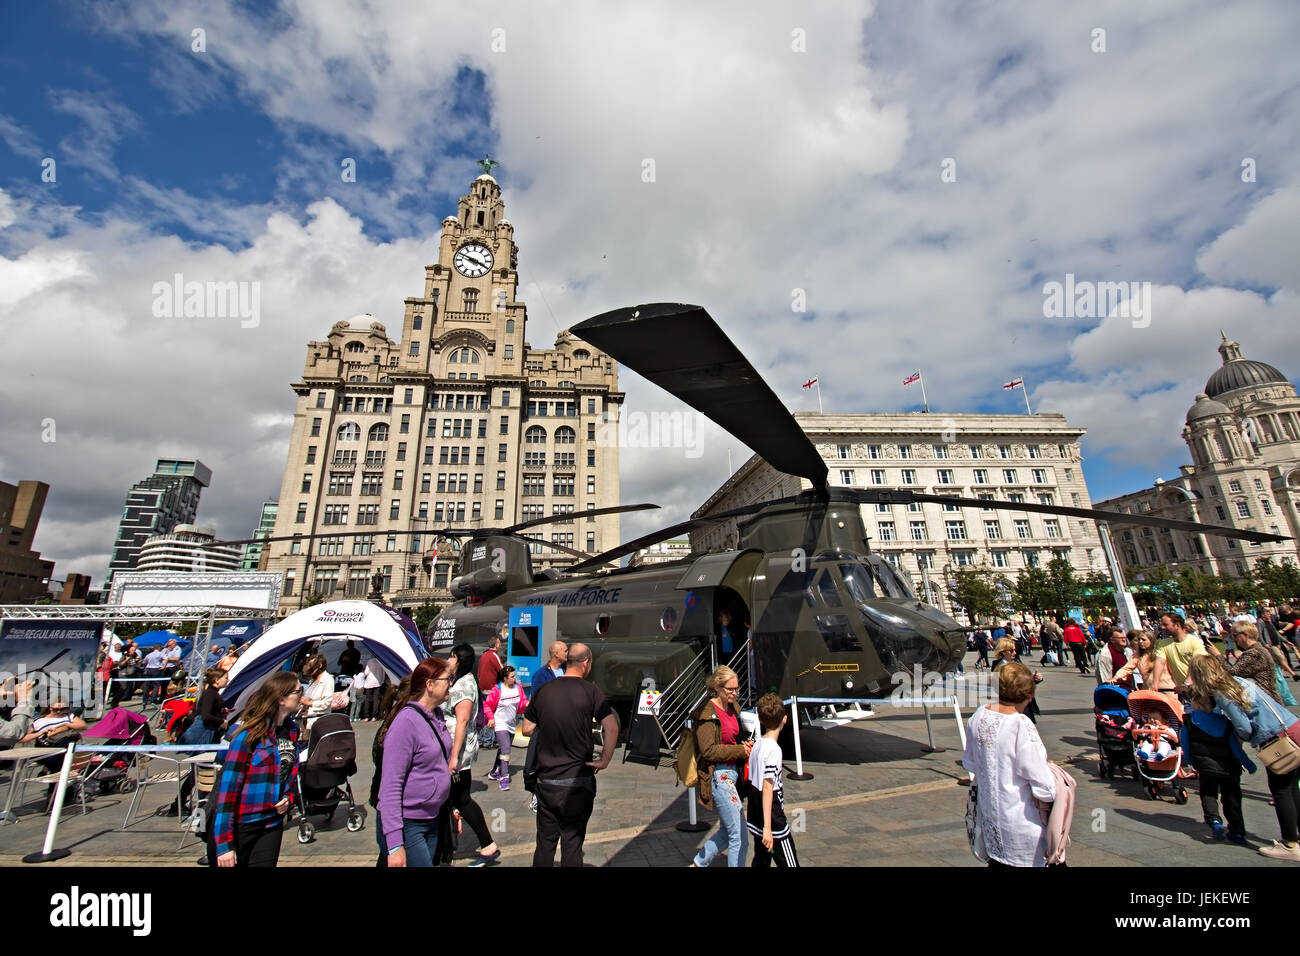 Chinook helicopter, part of the static army display at the Pier Head Liverpool to take part in the Armed Forces Day celebrations. Stock Photo